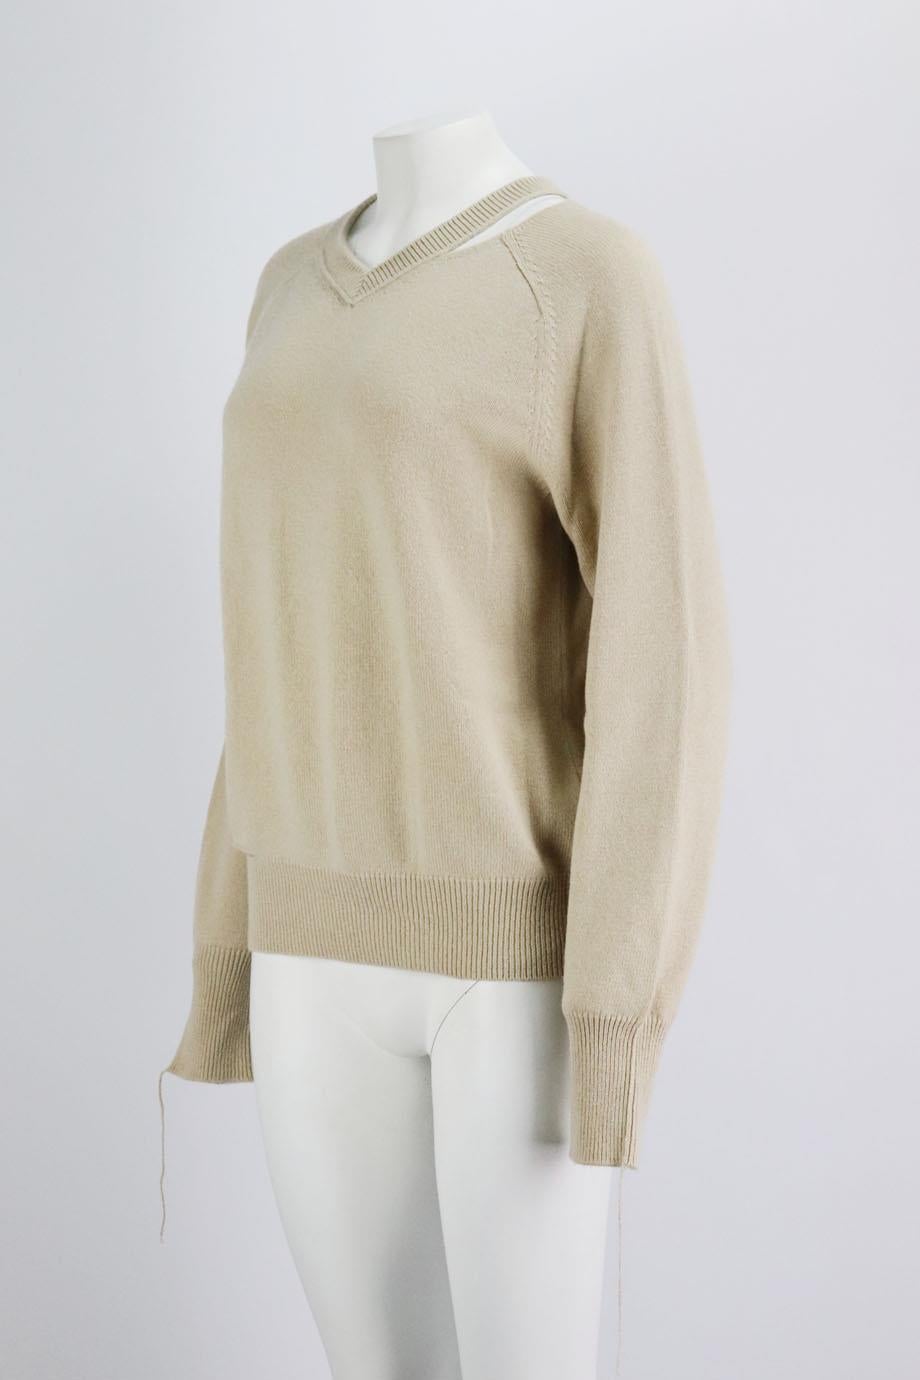 This sweater by Helmut Lang has been knitted from beige wool and cashmere-blend with artful pilling and distressed ladders throughout. Beige wool and cashmere-blend. Slips on. 50% Cotton, 35% wool, 15% cashmere. Size: Small (UK 8, US 4, FR 36, IT